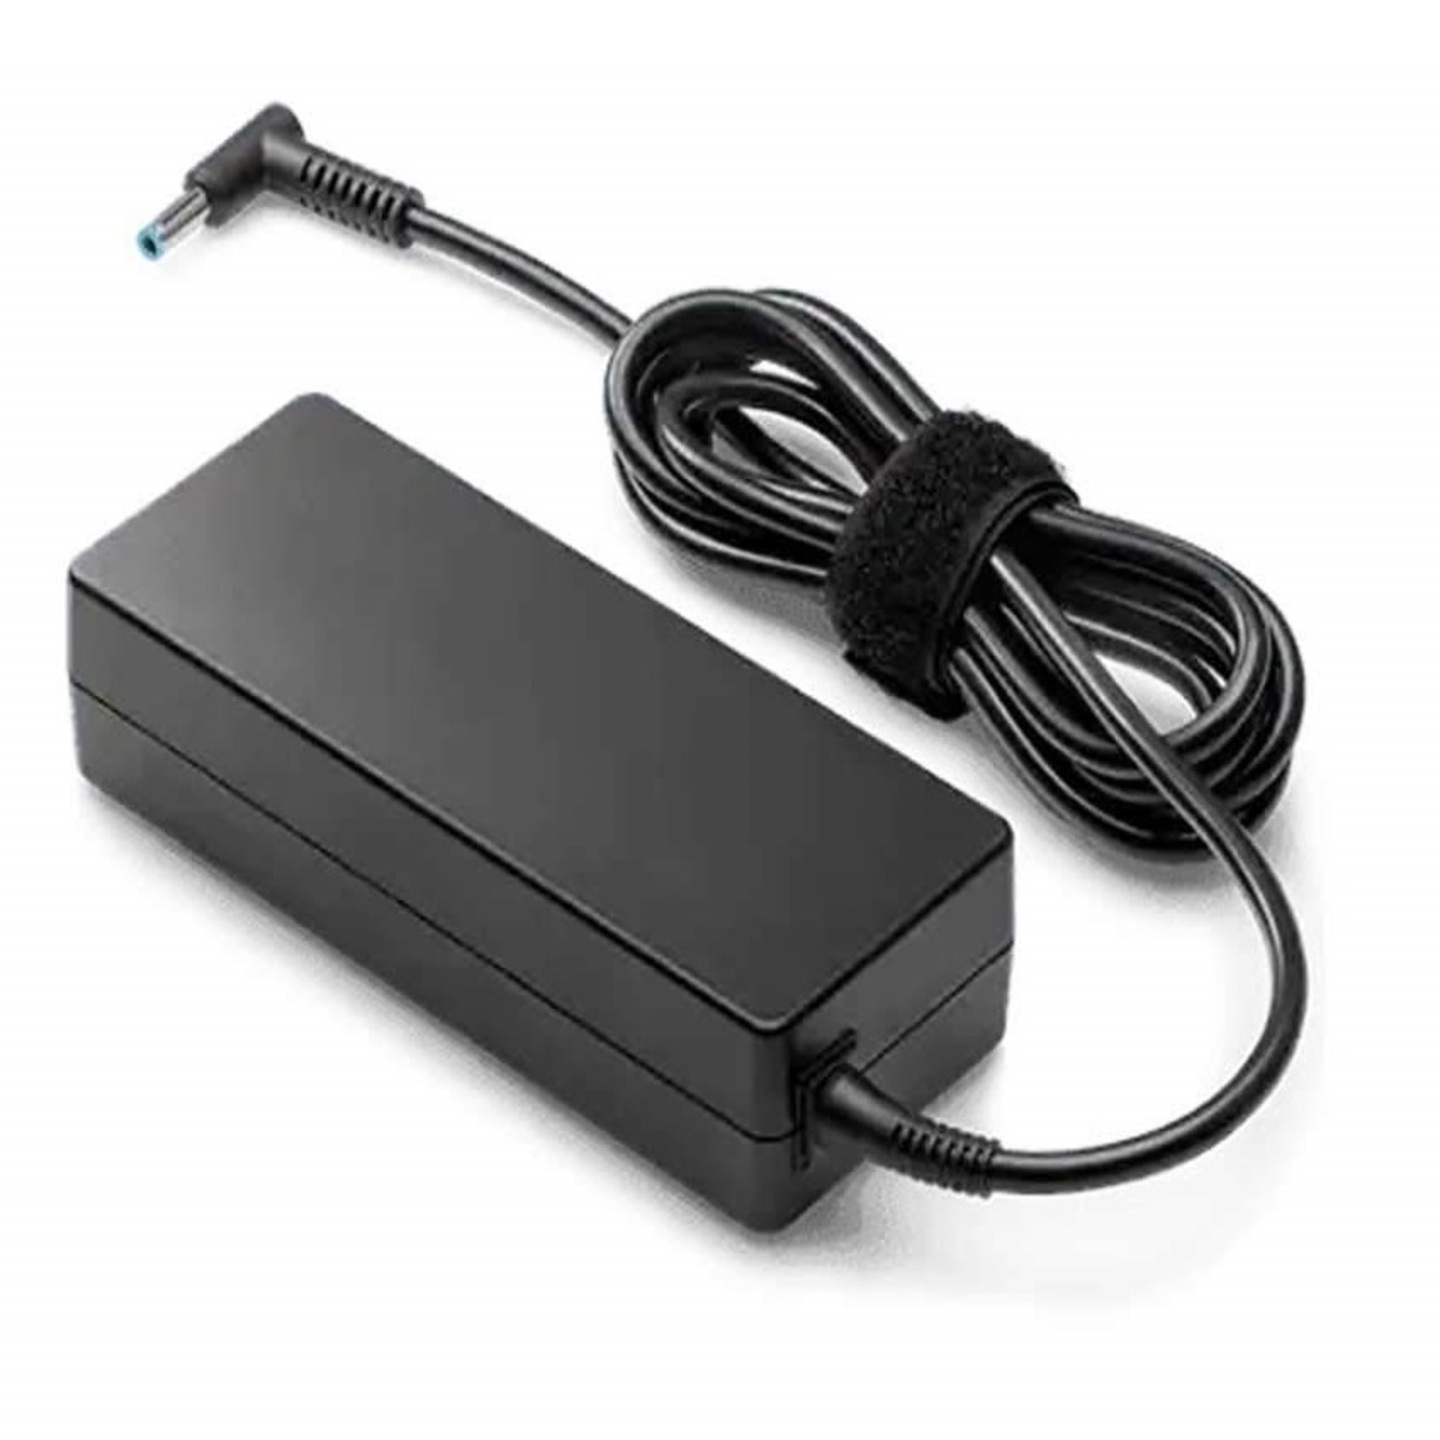 Original HP 65W AC Laptop Charger / Adapter 4.5mm for HP Pavilion (Without Power Cable)